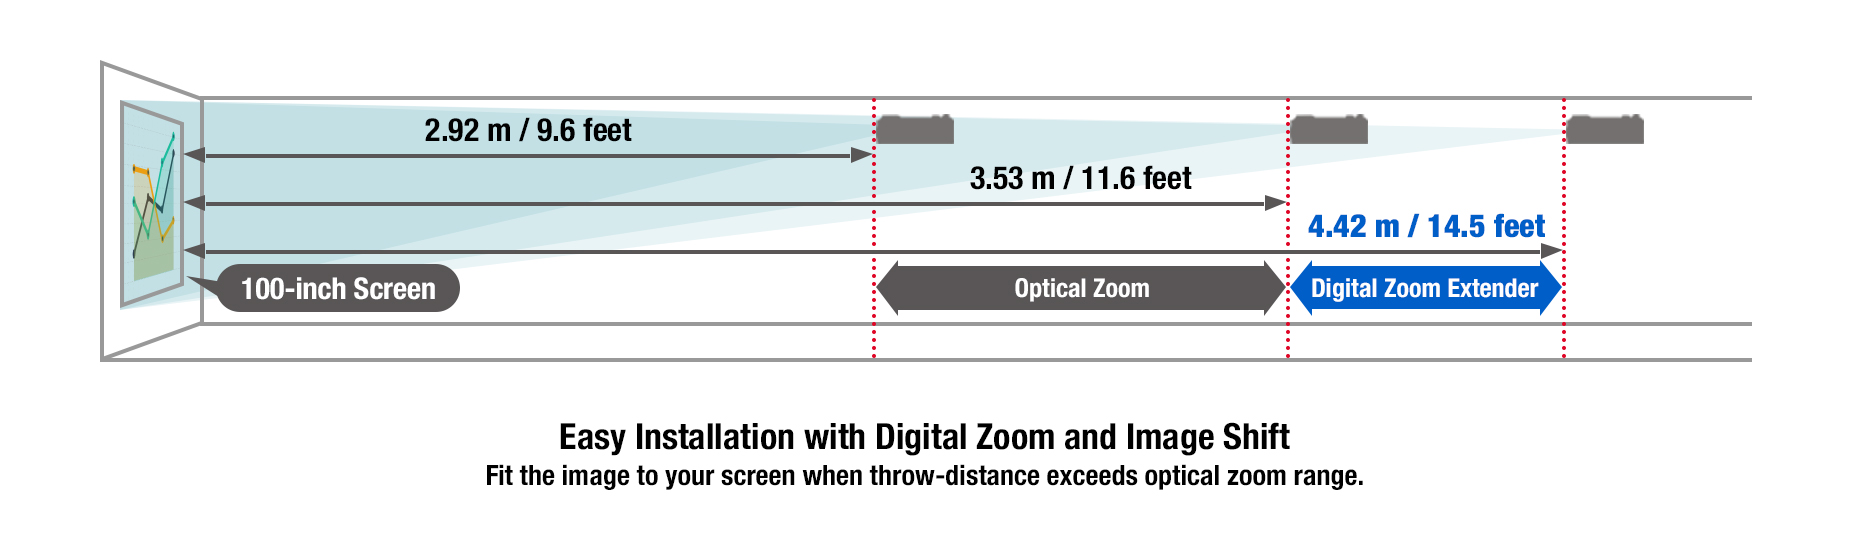 Easy Installation with Digital Zoom and Image Shift